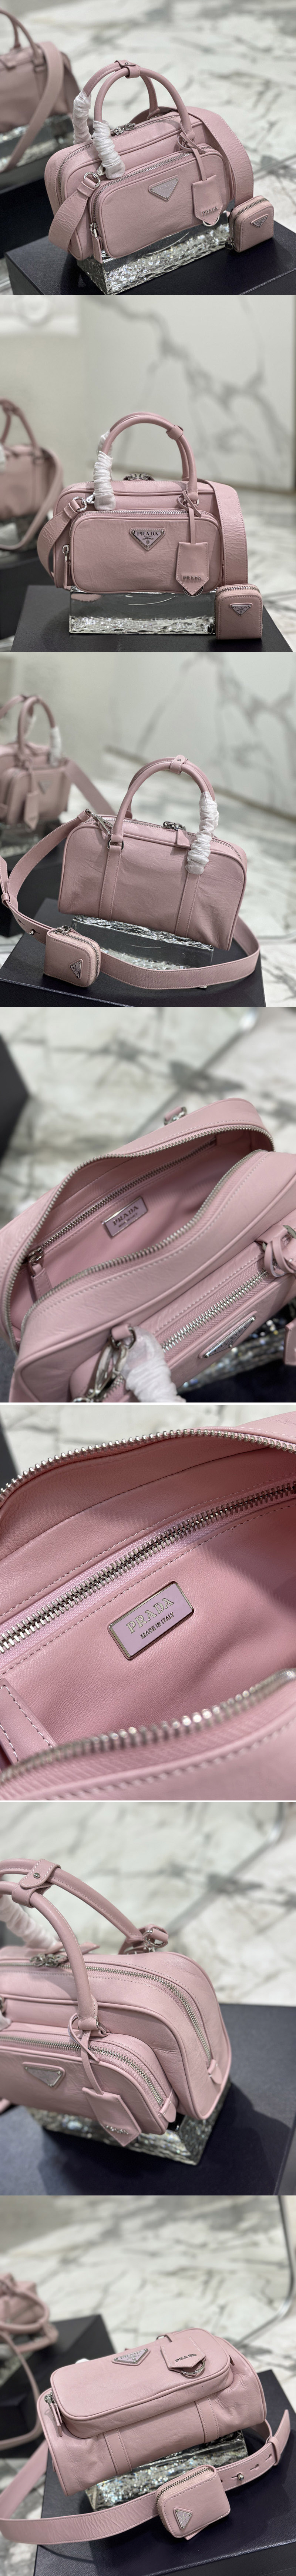 Replica Prada 1BB099 Antique nappa leather multi-pocket top-handle bag in Pink Leather